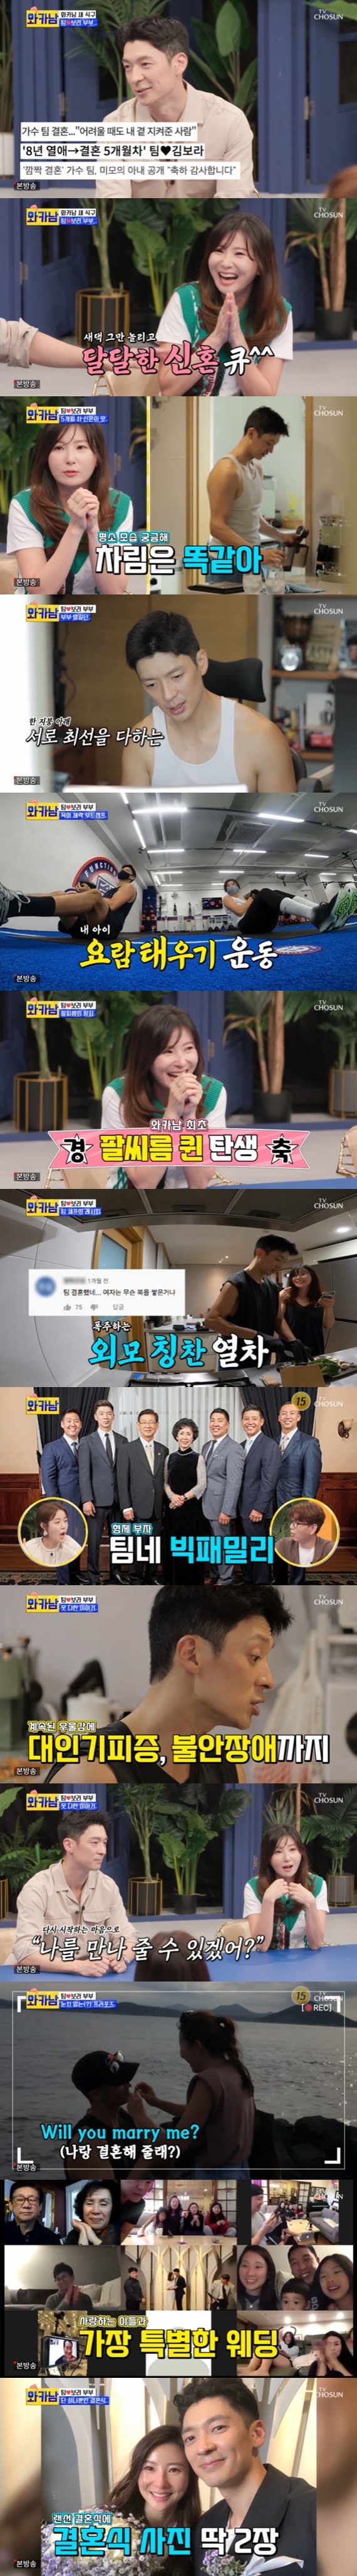 Seoul = = Man Who Writes Wife Card singer team and Kim Bo-ra couple released their honeymoon routine for the first time on air.In the TV Chosun entertainment program Man Writing Wife Card (wakanam), which was broadcast on the afternoon of the 13th, the daily life of the marriage team - Kim Bo-ra couple was included after eight years of devotion.The five-month honeymoon routine of the original ballad prince team, which had been loved by the sweet ballad song I Love You, was revealed.Tim started the day by separating and coffeeing from his neat newlywed house, where he said to Tim, Why did you do it? Did you brush your teeth? Whisper?and laughed.The two men, who met in the church and grew up in love, gathered their eyes together in morning prayers. After prayer, Kim Bo-ra continued his telecommuting.He runs an influencer marketing agency. The team showed off his wifes business skills, saying, Ive been ahead for eight years.While Kim Bo-ra focused on his work, Tim played the piano in his own studio room full of music equipment and called out I thought I would love you and boasted a still tone.I watched the Korean and Indonesian joint drama I Love You..., which was starring.The team said, It was a lot hard, I was in a dark state, but I felt good every time I met.The two then strengthened their physical strength with high intensity exercise for a precious child who will come someday.The team shared a high-intensity circuit training with Kim Bo-ra and said, I like to do it together rather than alone.Kim Bo-ra, who was originally a sportsman, also took the throne in an impromptu arm wrestling match and showed off his colorful charm.Behind the team preparing for dinner, Kim Bo-ra read the praise comments for the team, encouraging the teams confidence.The team, the fourth of the five brothers, said that they thought of up to five people in the second generation plan, but quickly apologized to the child to think about his age and made a pleasant atmosphere.Together with Tuna Casserole and Stakes, which the team prepared, the two recalled the moment they were at stake during their eight-year love.The team continued to suffer from depression, interpersonal avoidance and anxiety disorders, and said, I tried to live with gratitude, pretending, and trying to live with gratitude, but it became poisonous.After the success of I love you, the team that had a hard day in the conflict decided to go to Hawaii alone with Kim Bo-ra, who had been dating for more than two years.At the time, Kim Bo-ra said, I thought it was necessary for the team, so I was ready to accept it even if I broke up. The team comforted the team and expressed sorry and gratitude to Kim Bo-ra.The team that came back from Hawaii was completely different, adding: It was a turning point in life, it felt like the color glasses I wore all my life were stripped off.Tim then apologized to Kim Bo-ra with tears and said, You look new, can you meet me with a heart that starts again?In addition, the team said that they proposed with the words I love you for the first time in eight years, singing Night Letter.The two men participated in the teams brother, Kim Bo-ras brother, and they left a special memory in the untapped marriage ceremony.On the other hand, TV Chosun wakanam is broadcasted every Tuesday at 10:00 pm as a New Normal Family Reality program that reflects the social trends of the growing economy and delightfully depicts the subtlely changed family image.